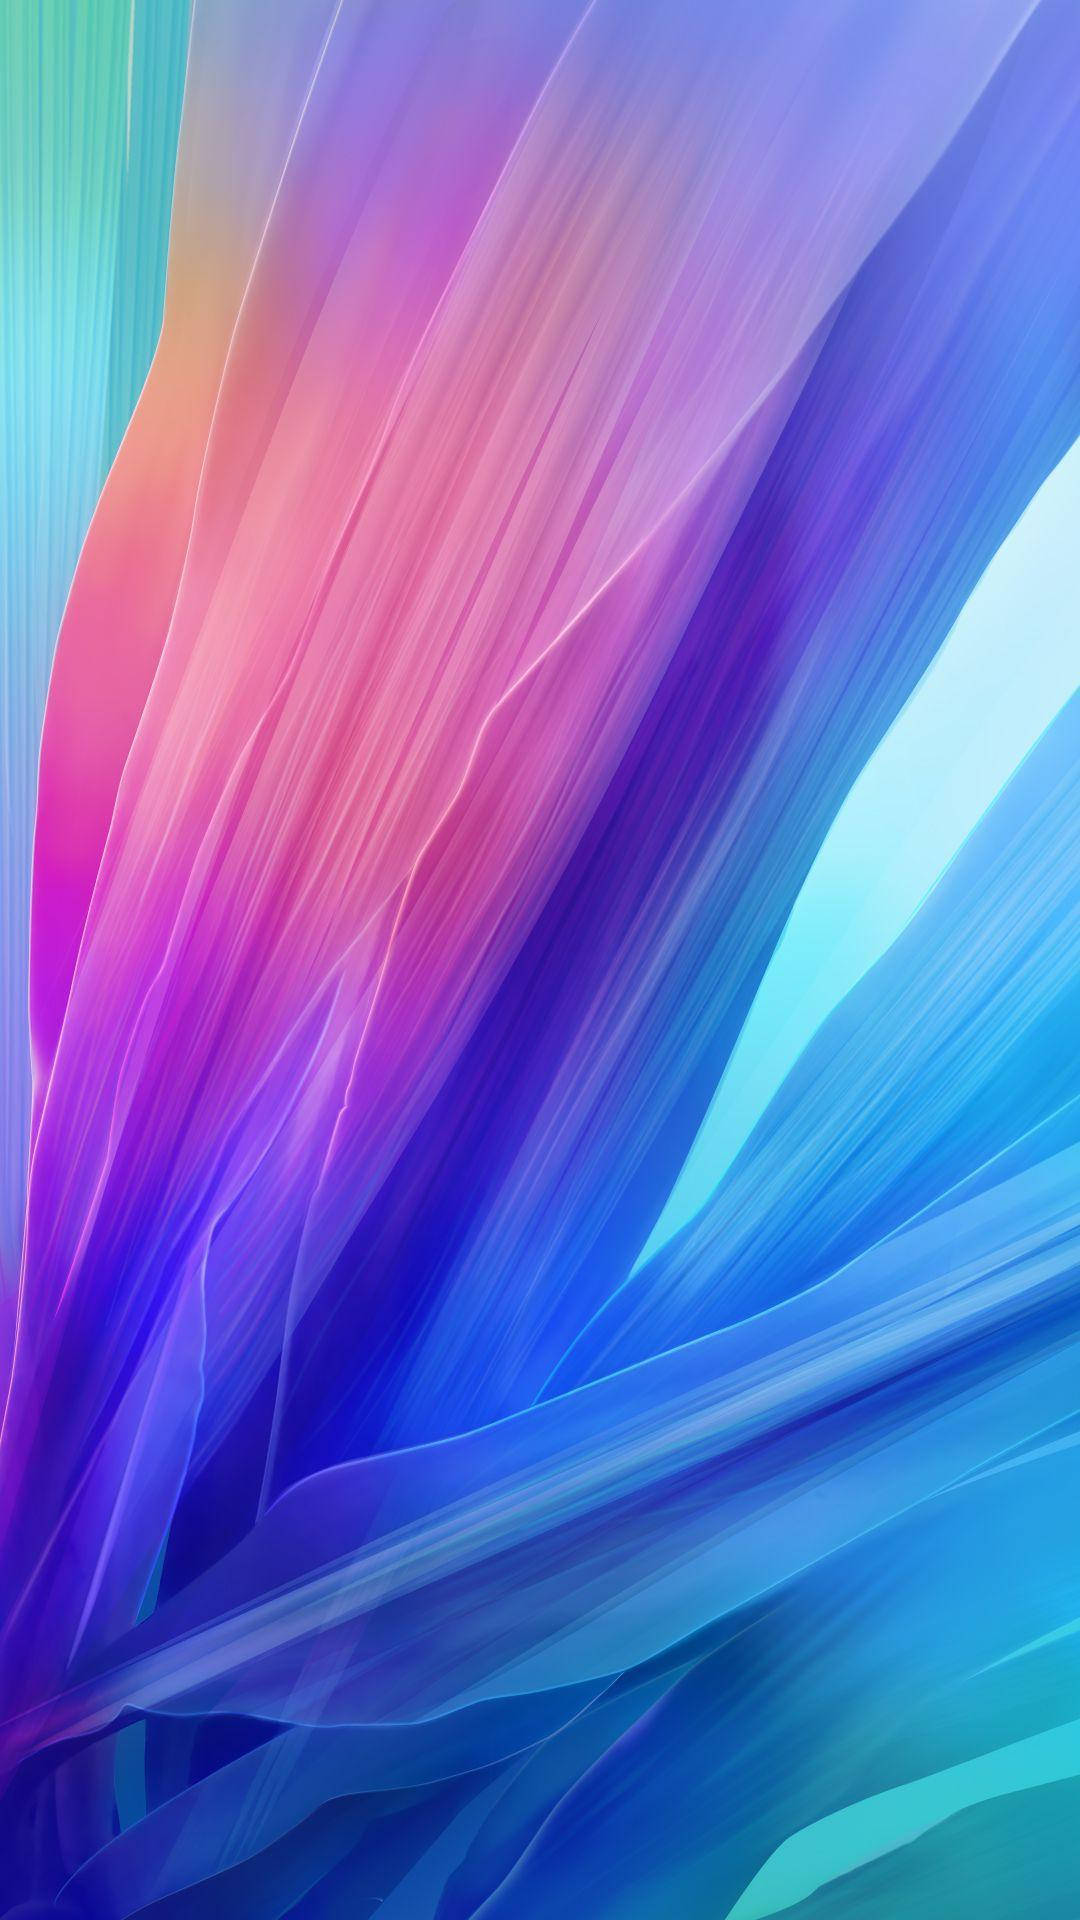 Mermaid-colored Feathers Iphone 8 Live Background